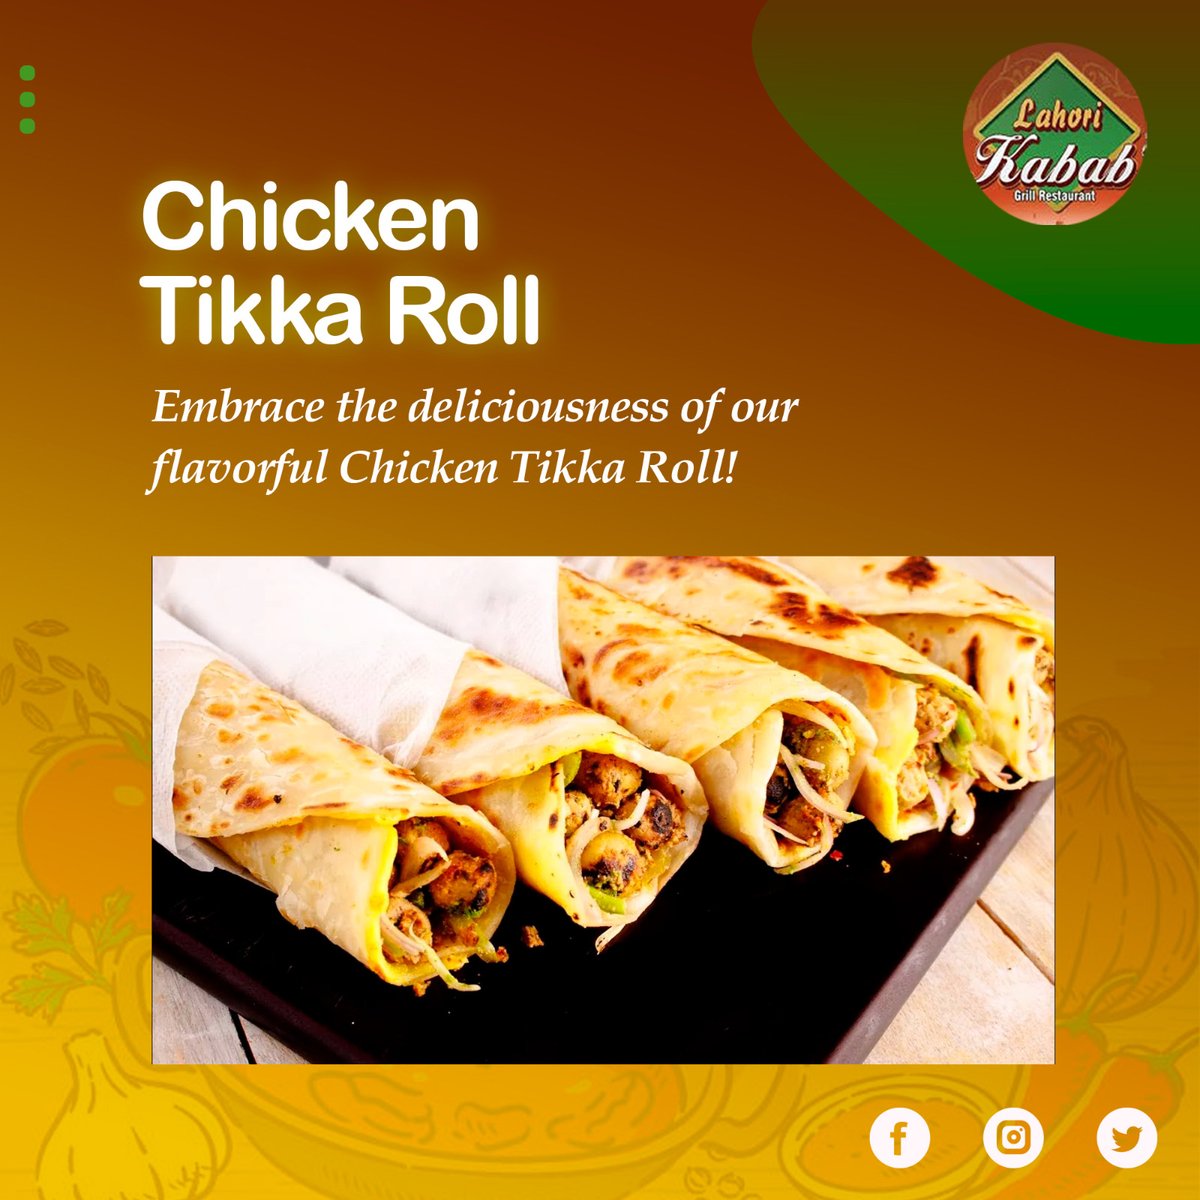 Our Chicken Tikka Roll is a scrumptious delight with juicy chicken tikka, fresh Salad, and mouthwatering sauce, all wrapped in soft bread to give you a meal to grab on the go! 
 
Call us Now: +1 717-547-6062
#lahorikababandgrill #Restaurant #ChickenTikkaRoll #sauce #meal #onthego